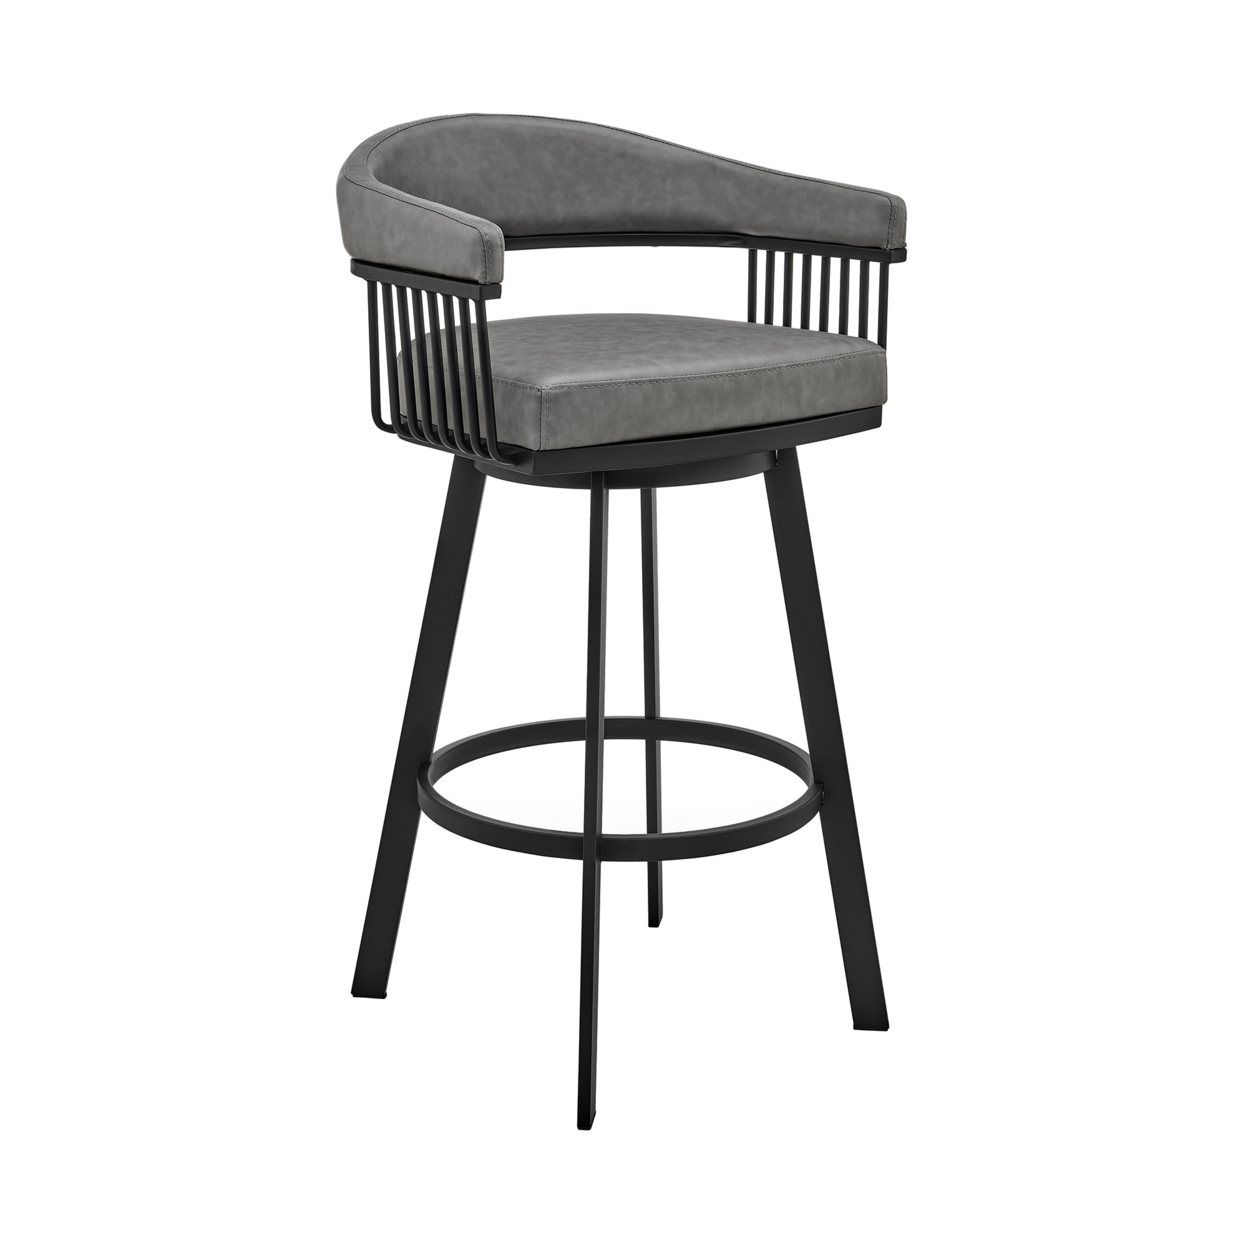 Swivel Barstool With Open Metal Frame And Slatted Arms, Gray And Black- Saltoro Sherpi